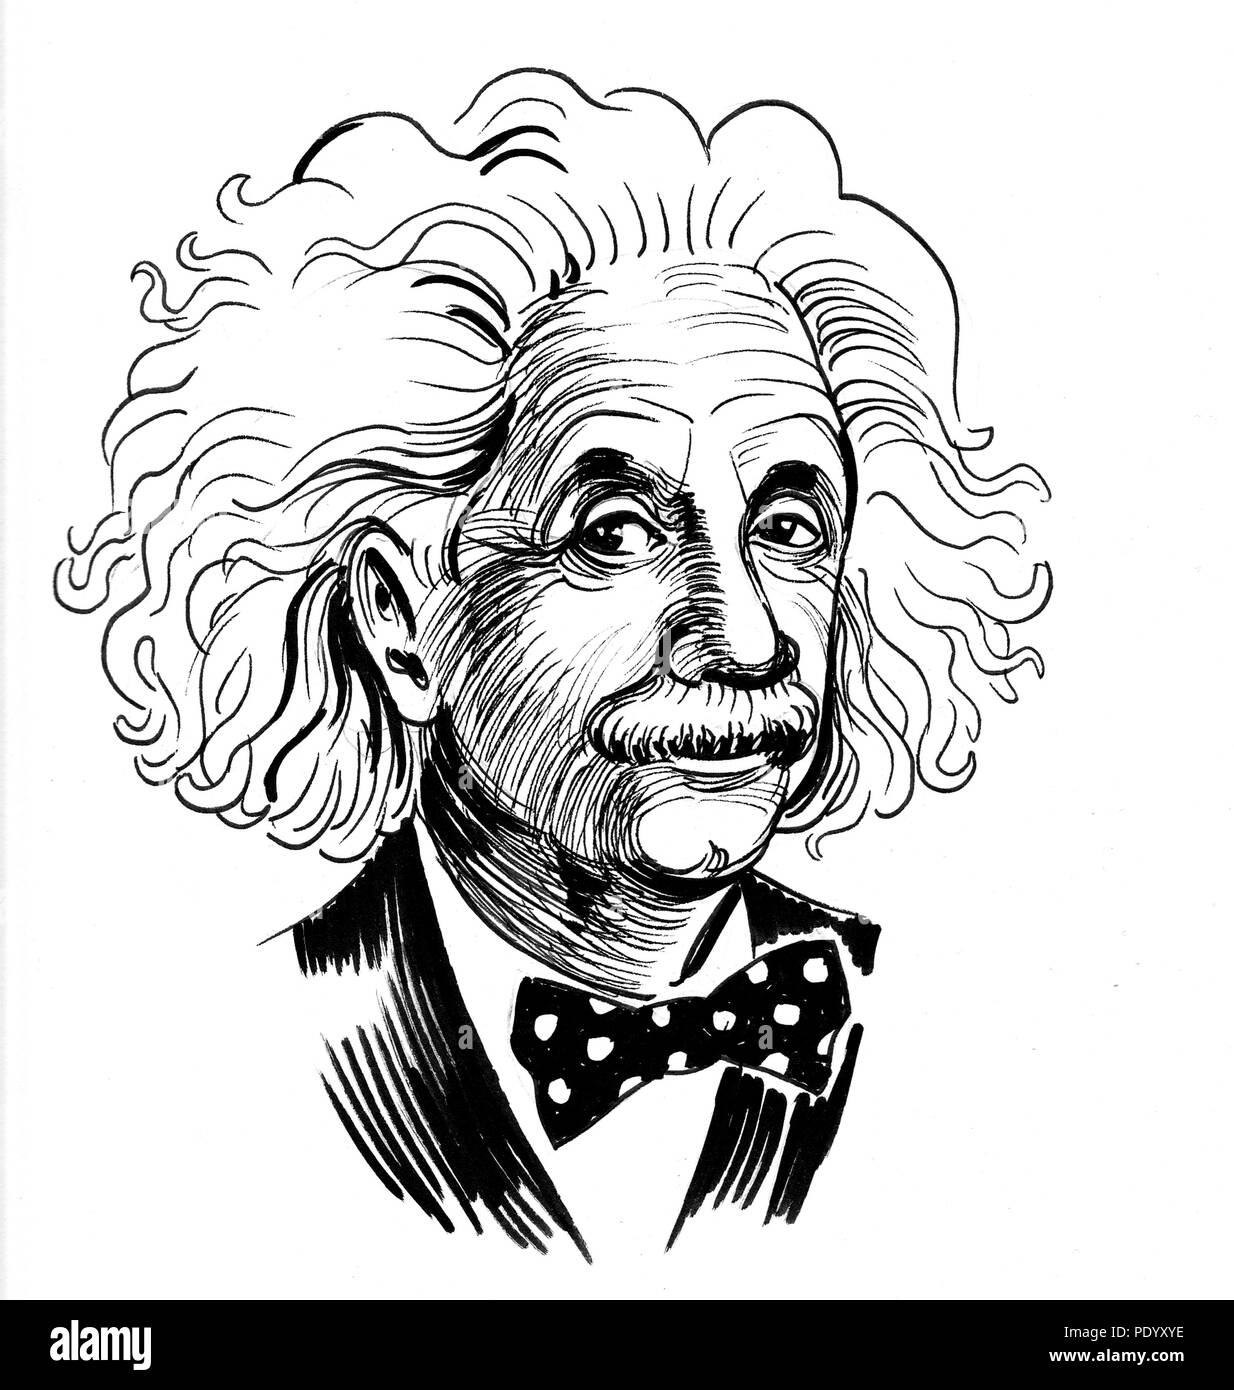 Albert Einstein. Famous physicist. Ink black and white drawing Stock Photo